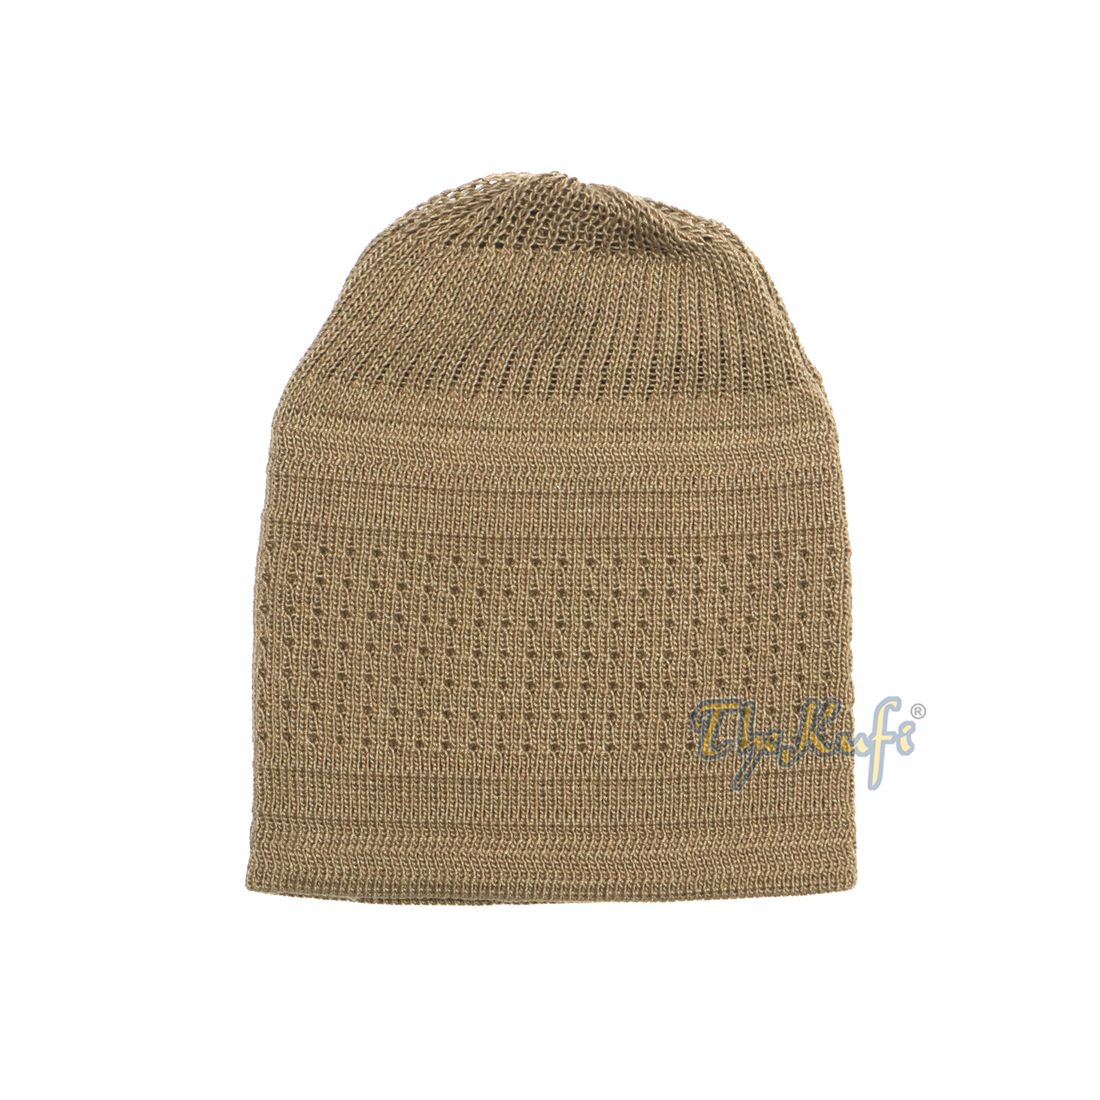 Light Brown Cotton Stretch-knit Kufi Double Layer Woven Design Hat